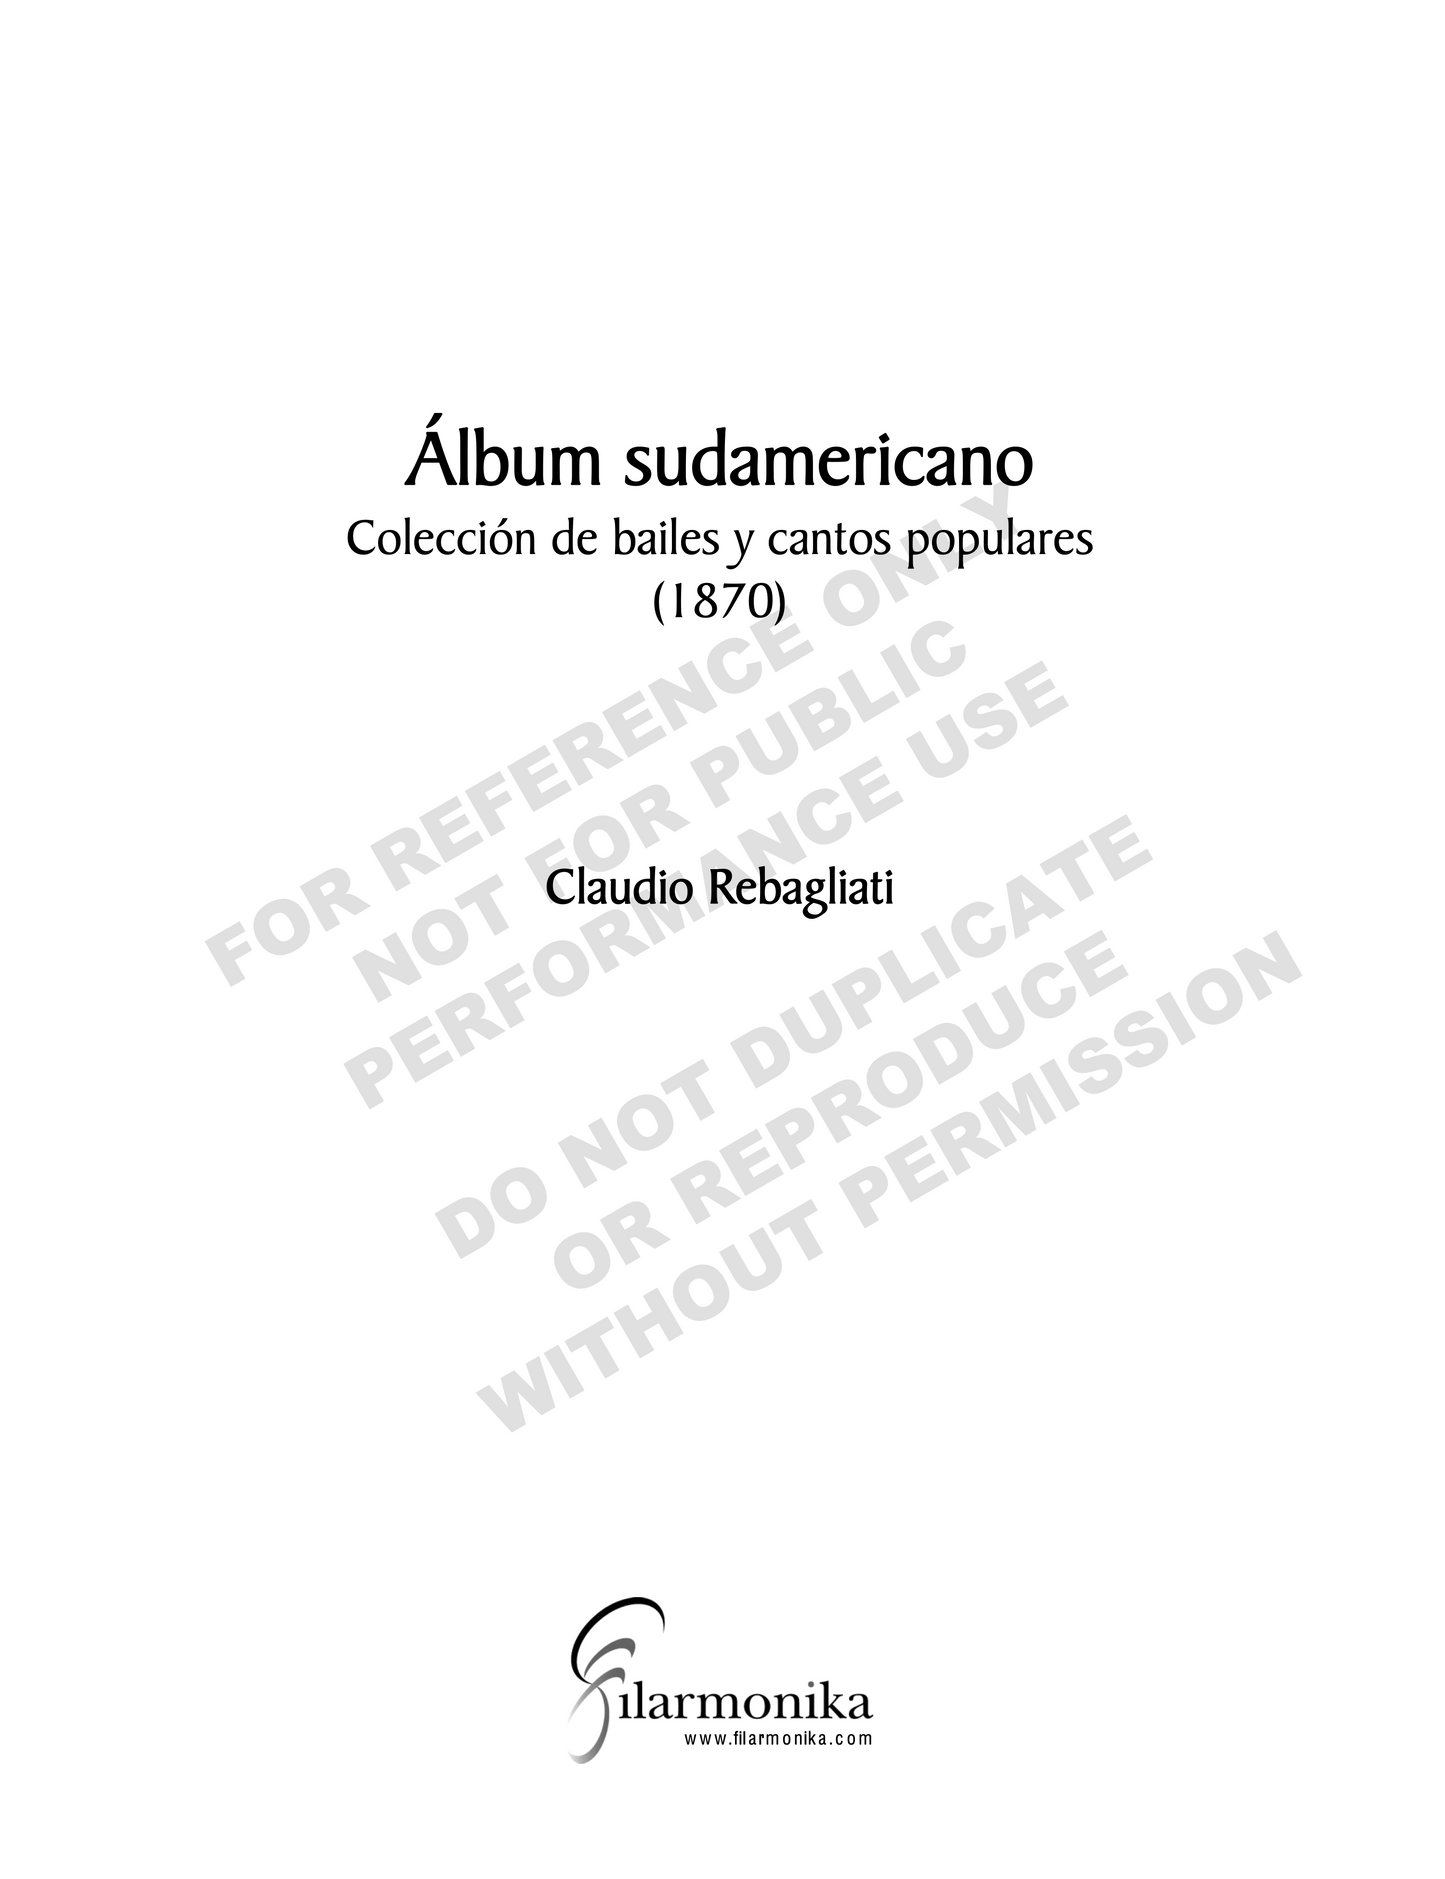 Álbum Sudamericano, Collection of Popular Songs and Dances for solo piano